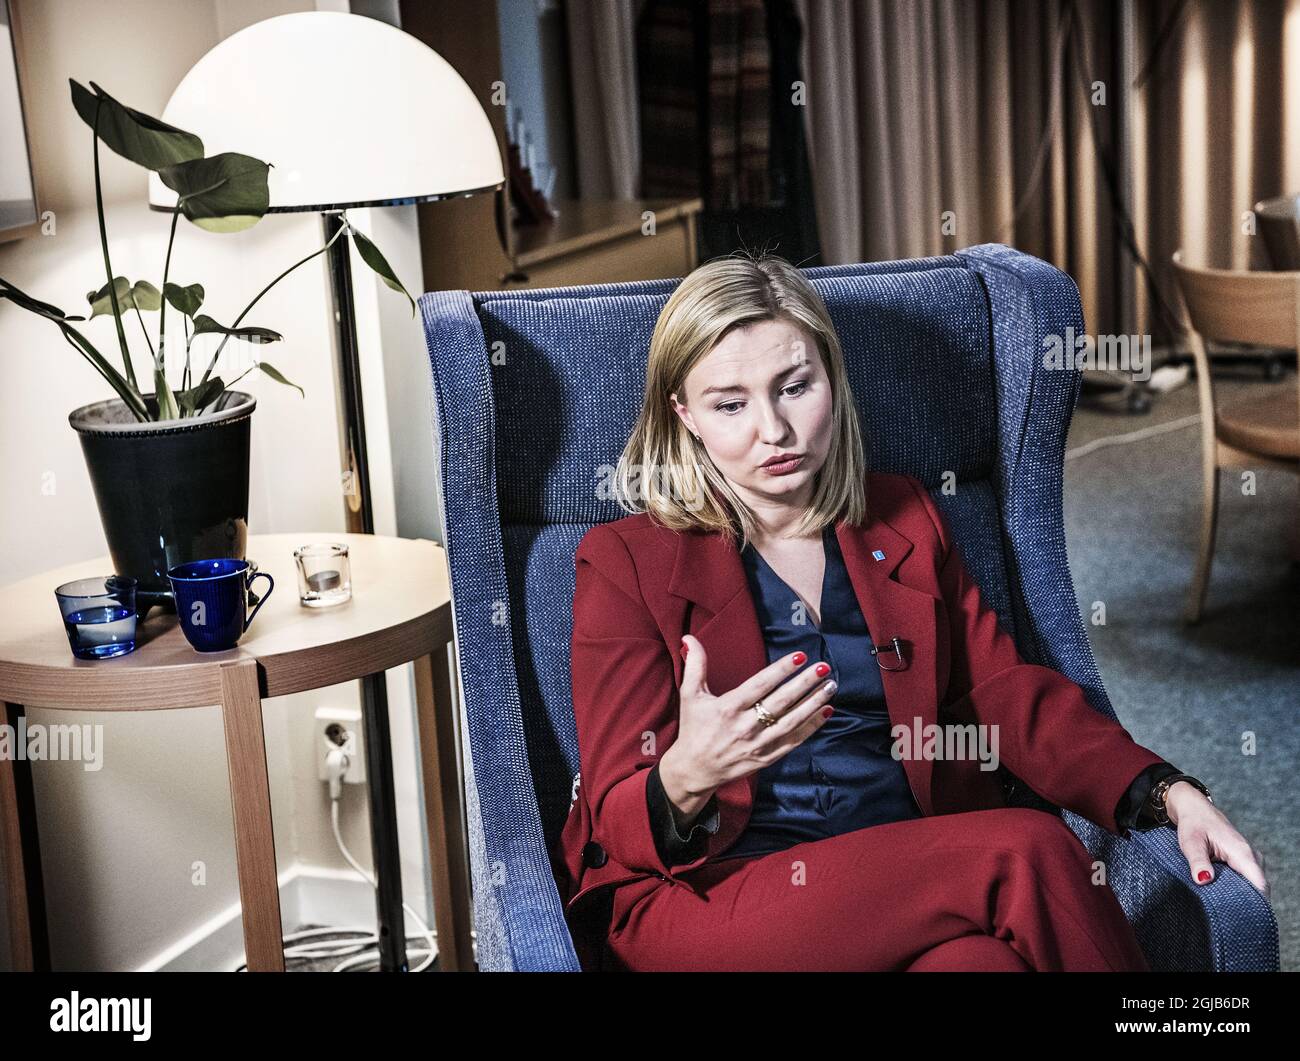 2018-01-18 Ebba Busch Thor, Chairman of the Kristdemokraterna, Sweden's Christian Democratic party Foto: Tomas Oneborg / code 30142  Stock Photo